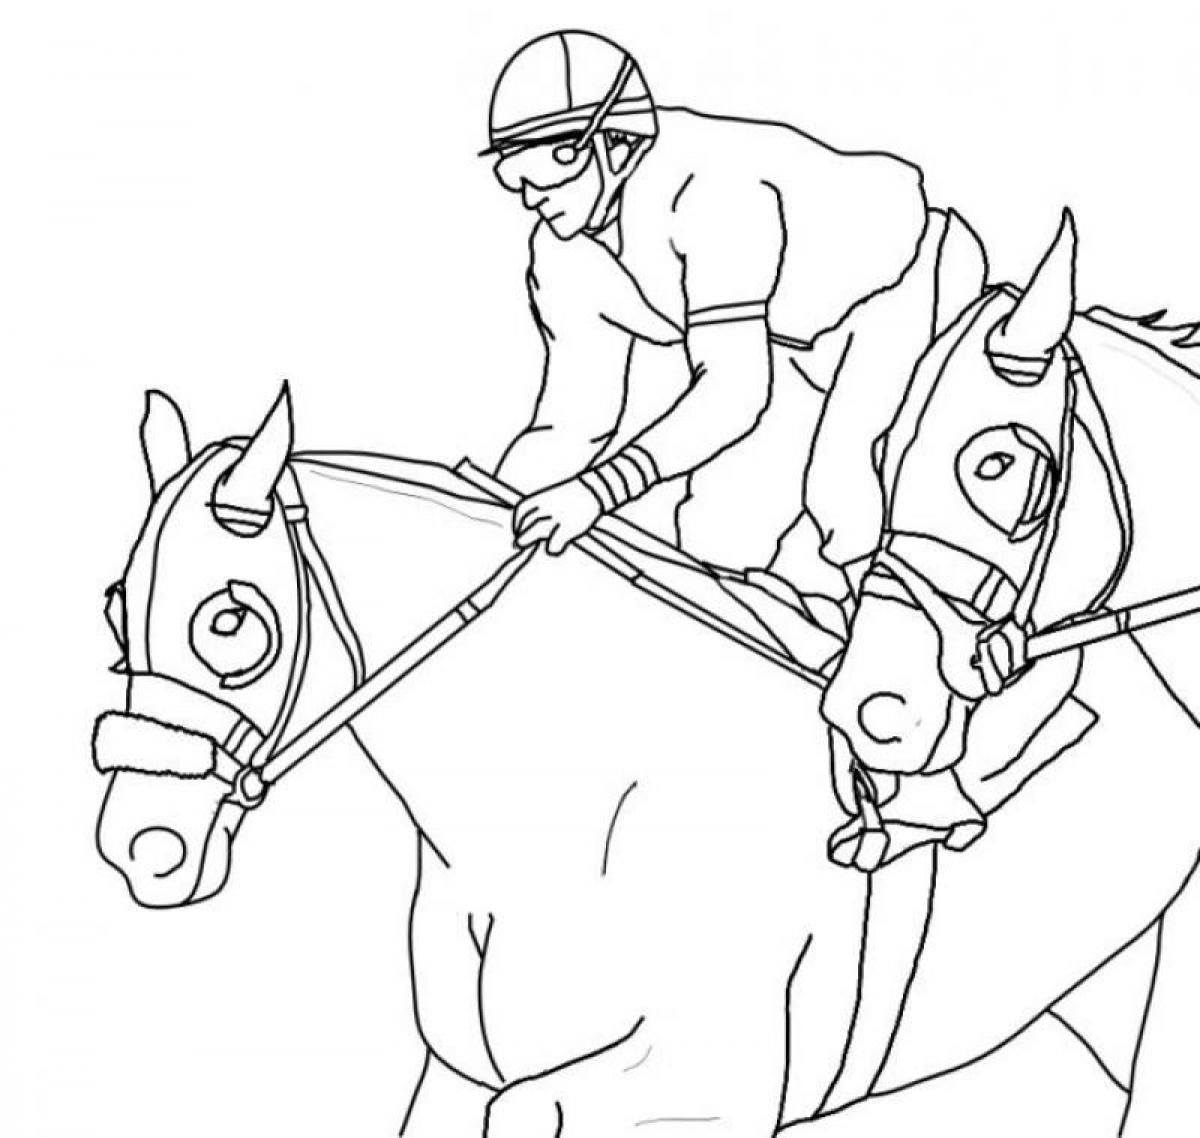 A Rider and a Barbie Horse Coloring Page